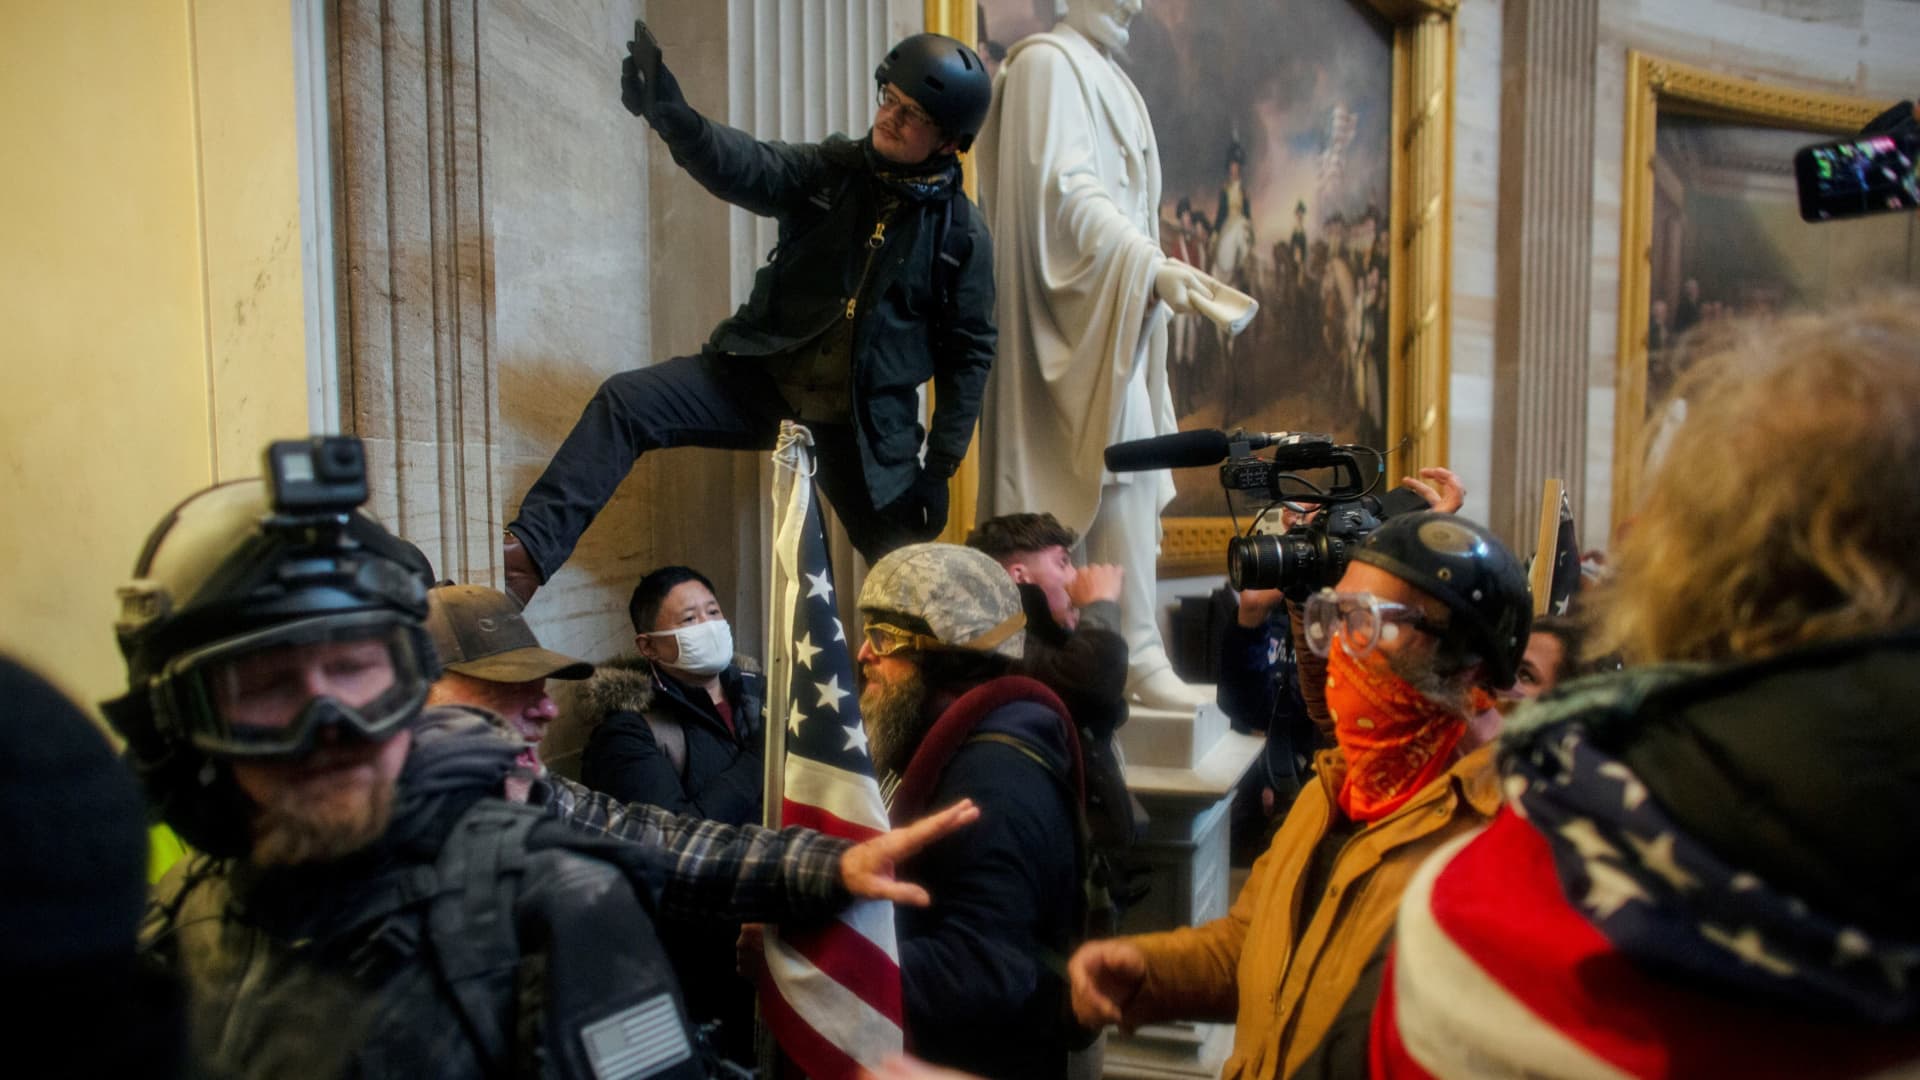 Pro-Trump protesters storm the U.S. Capitol to contest the certification of the 2020 U.S. presidential election results by the U.S. Congress, at the U.S. Capitol Building in Washington, D.C., U.S. January 6, 2021.